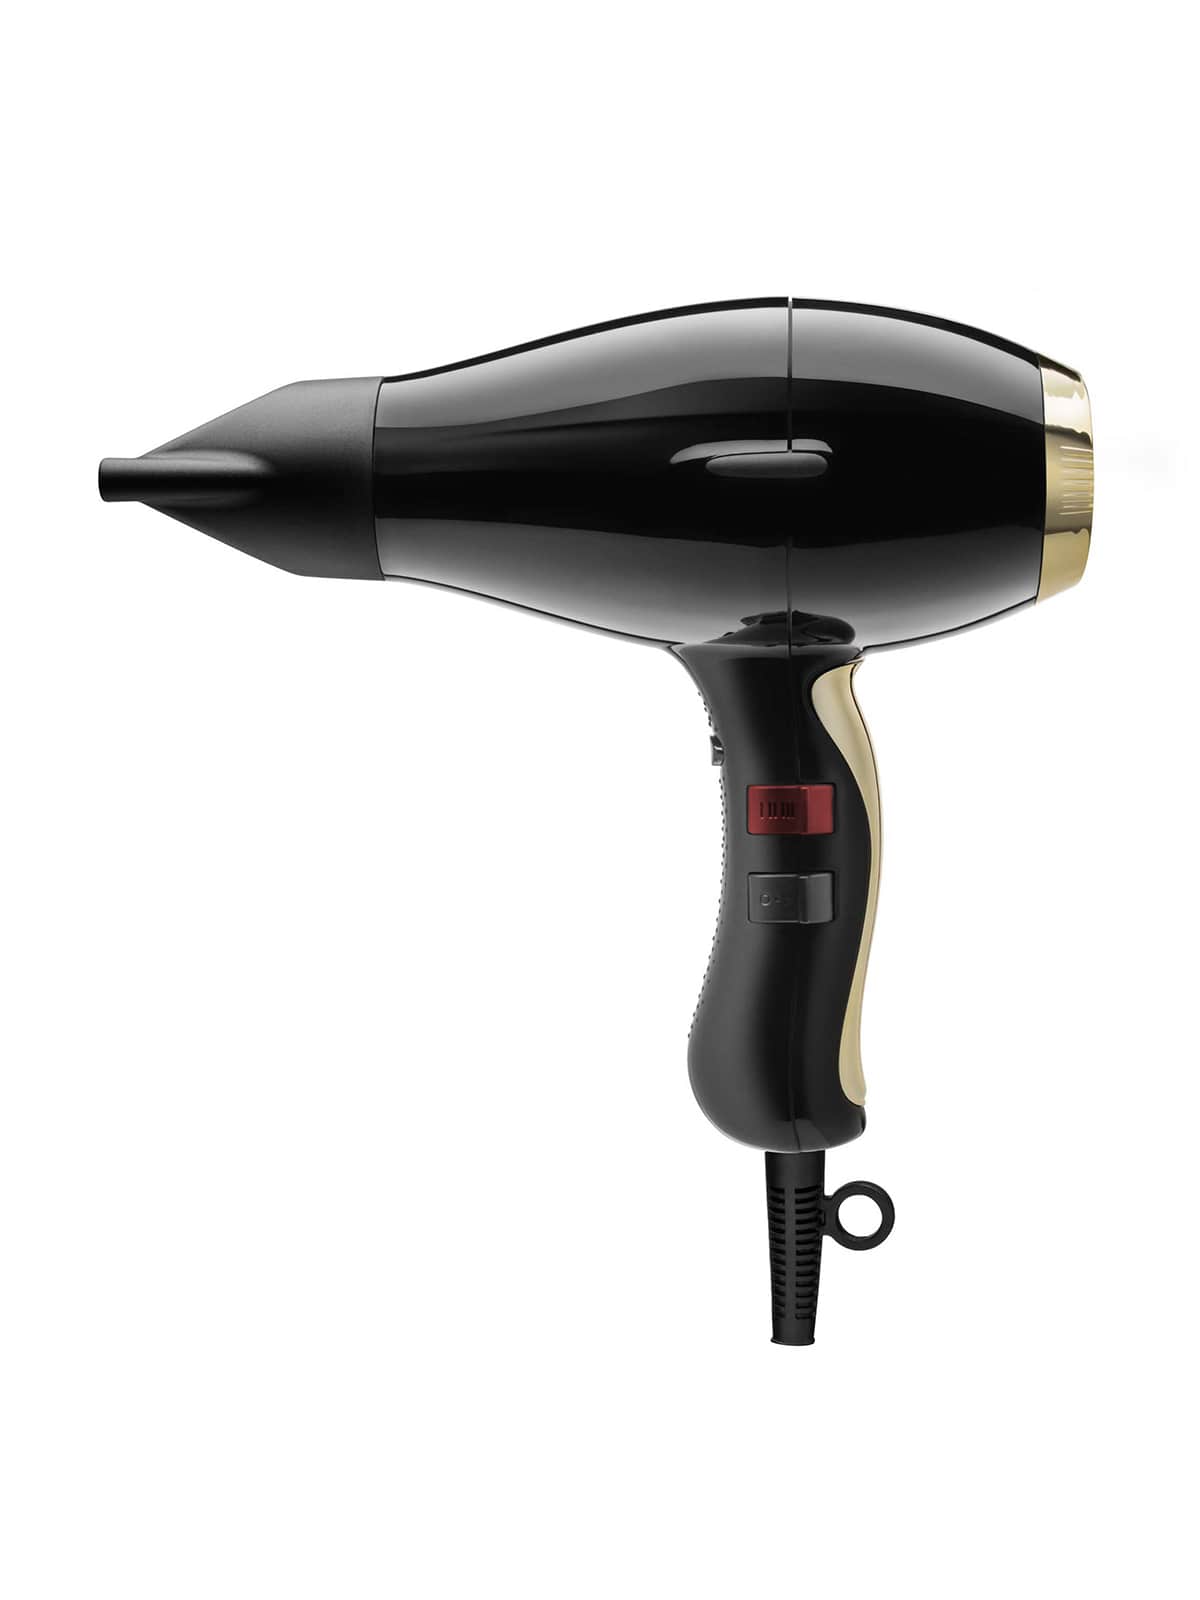 Elchim 3900 Light Ionic Hair Dryer: Professional Ceramic and Ionic Blow Dryer - 2 Concentrators Included, Fast Drying, Quiet, and Lightweight Black/Silver